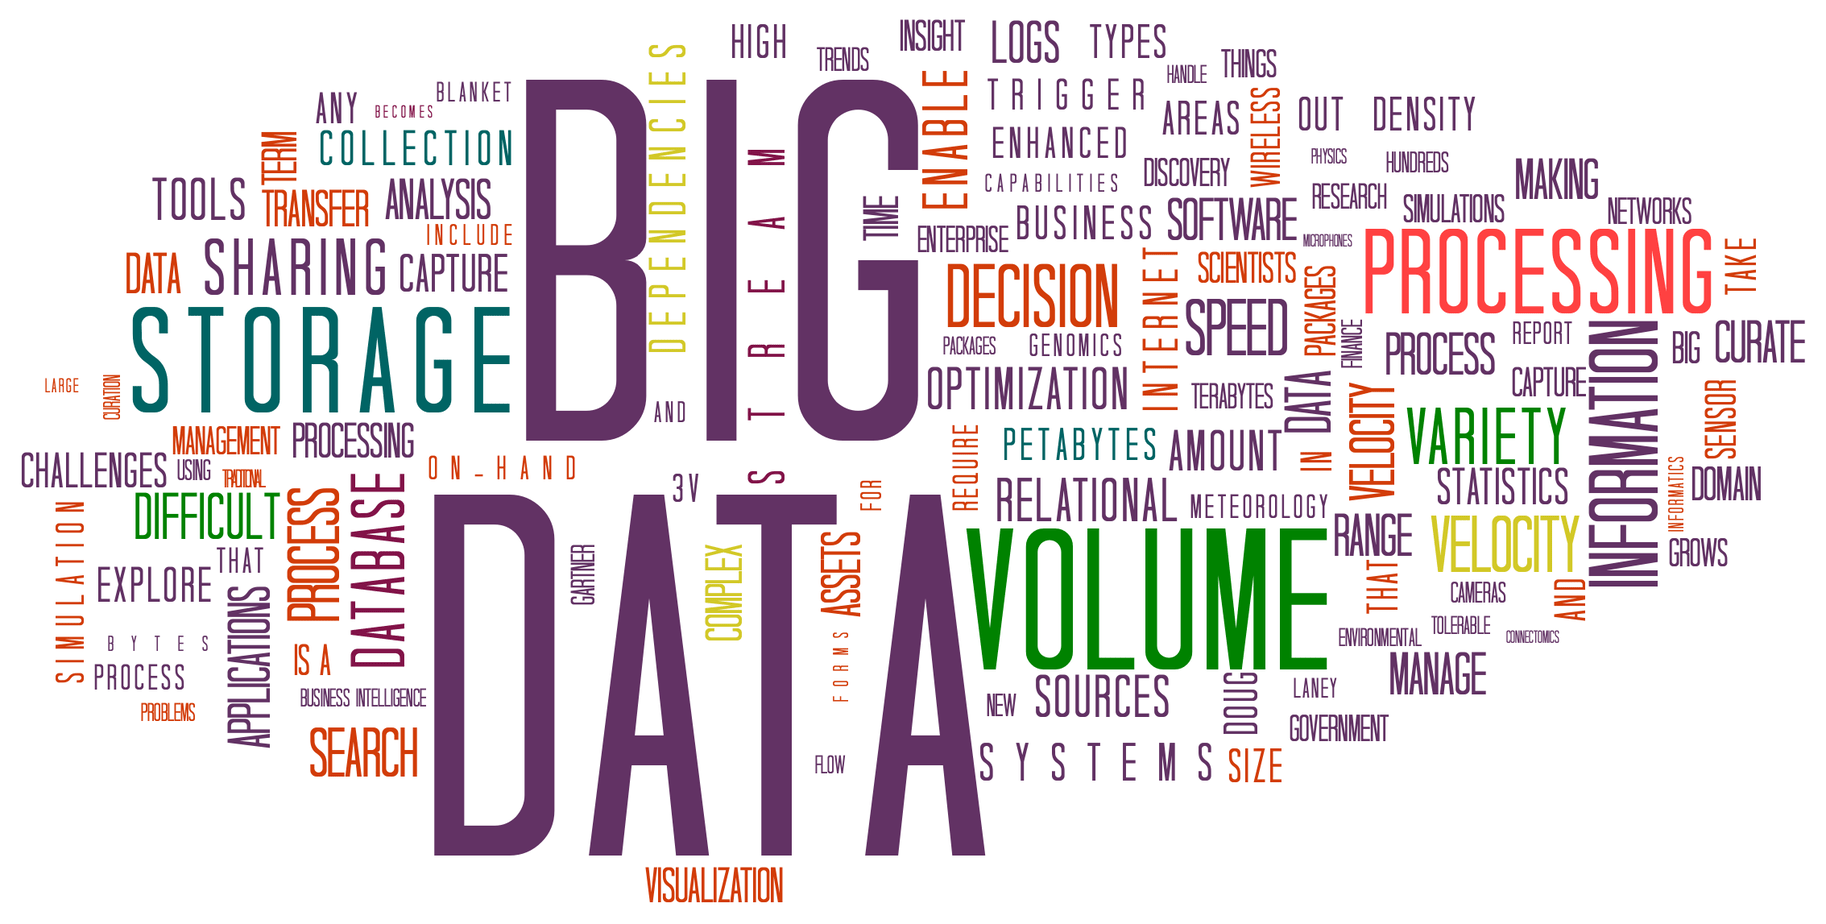 What Is Big Data and Why Should You Care About It? - 3